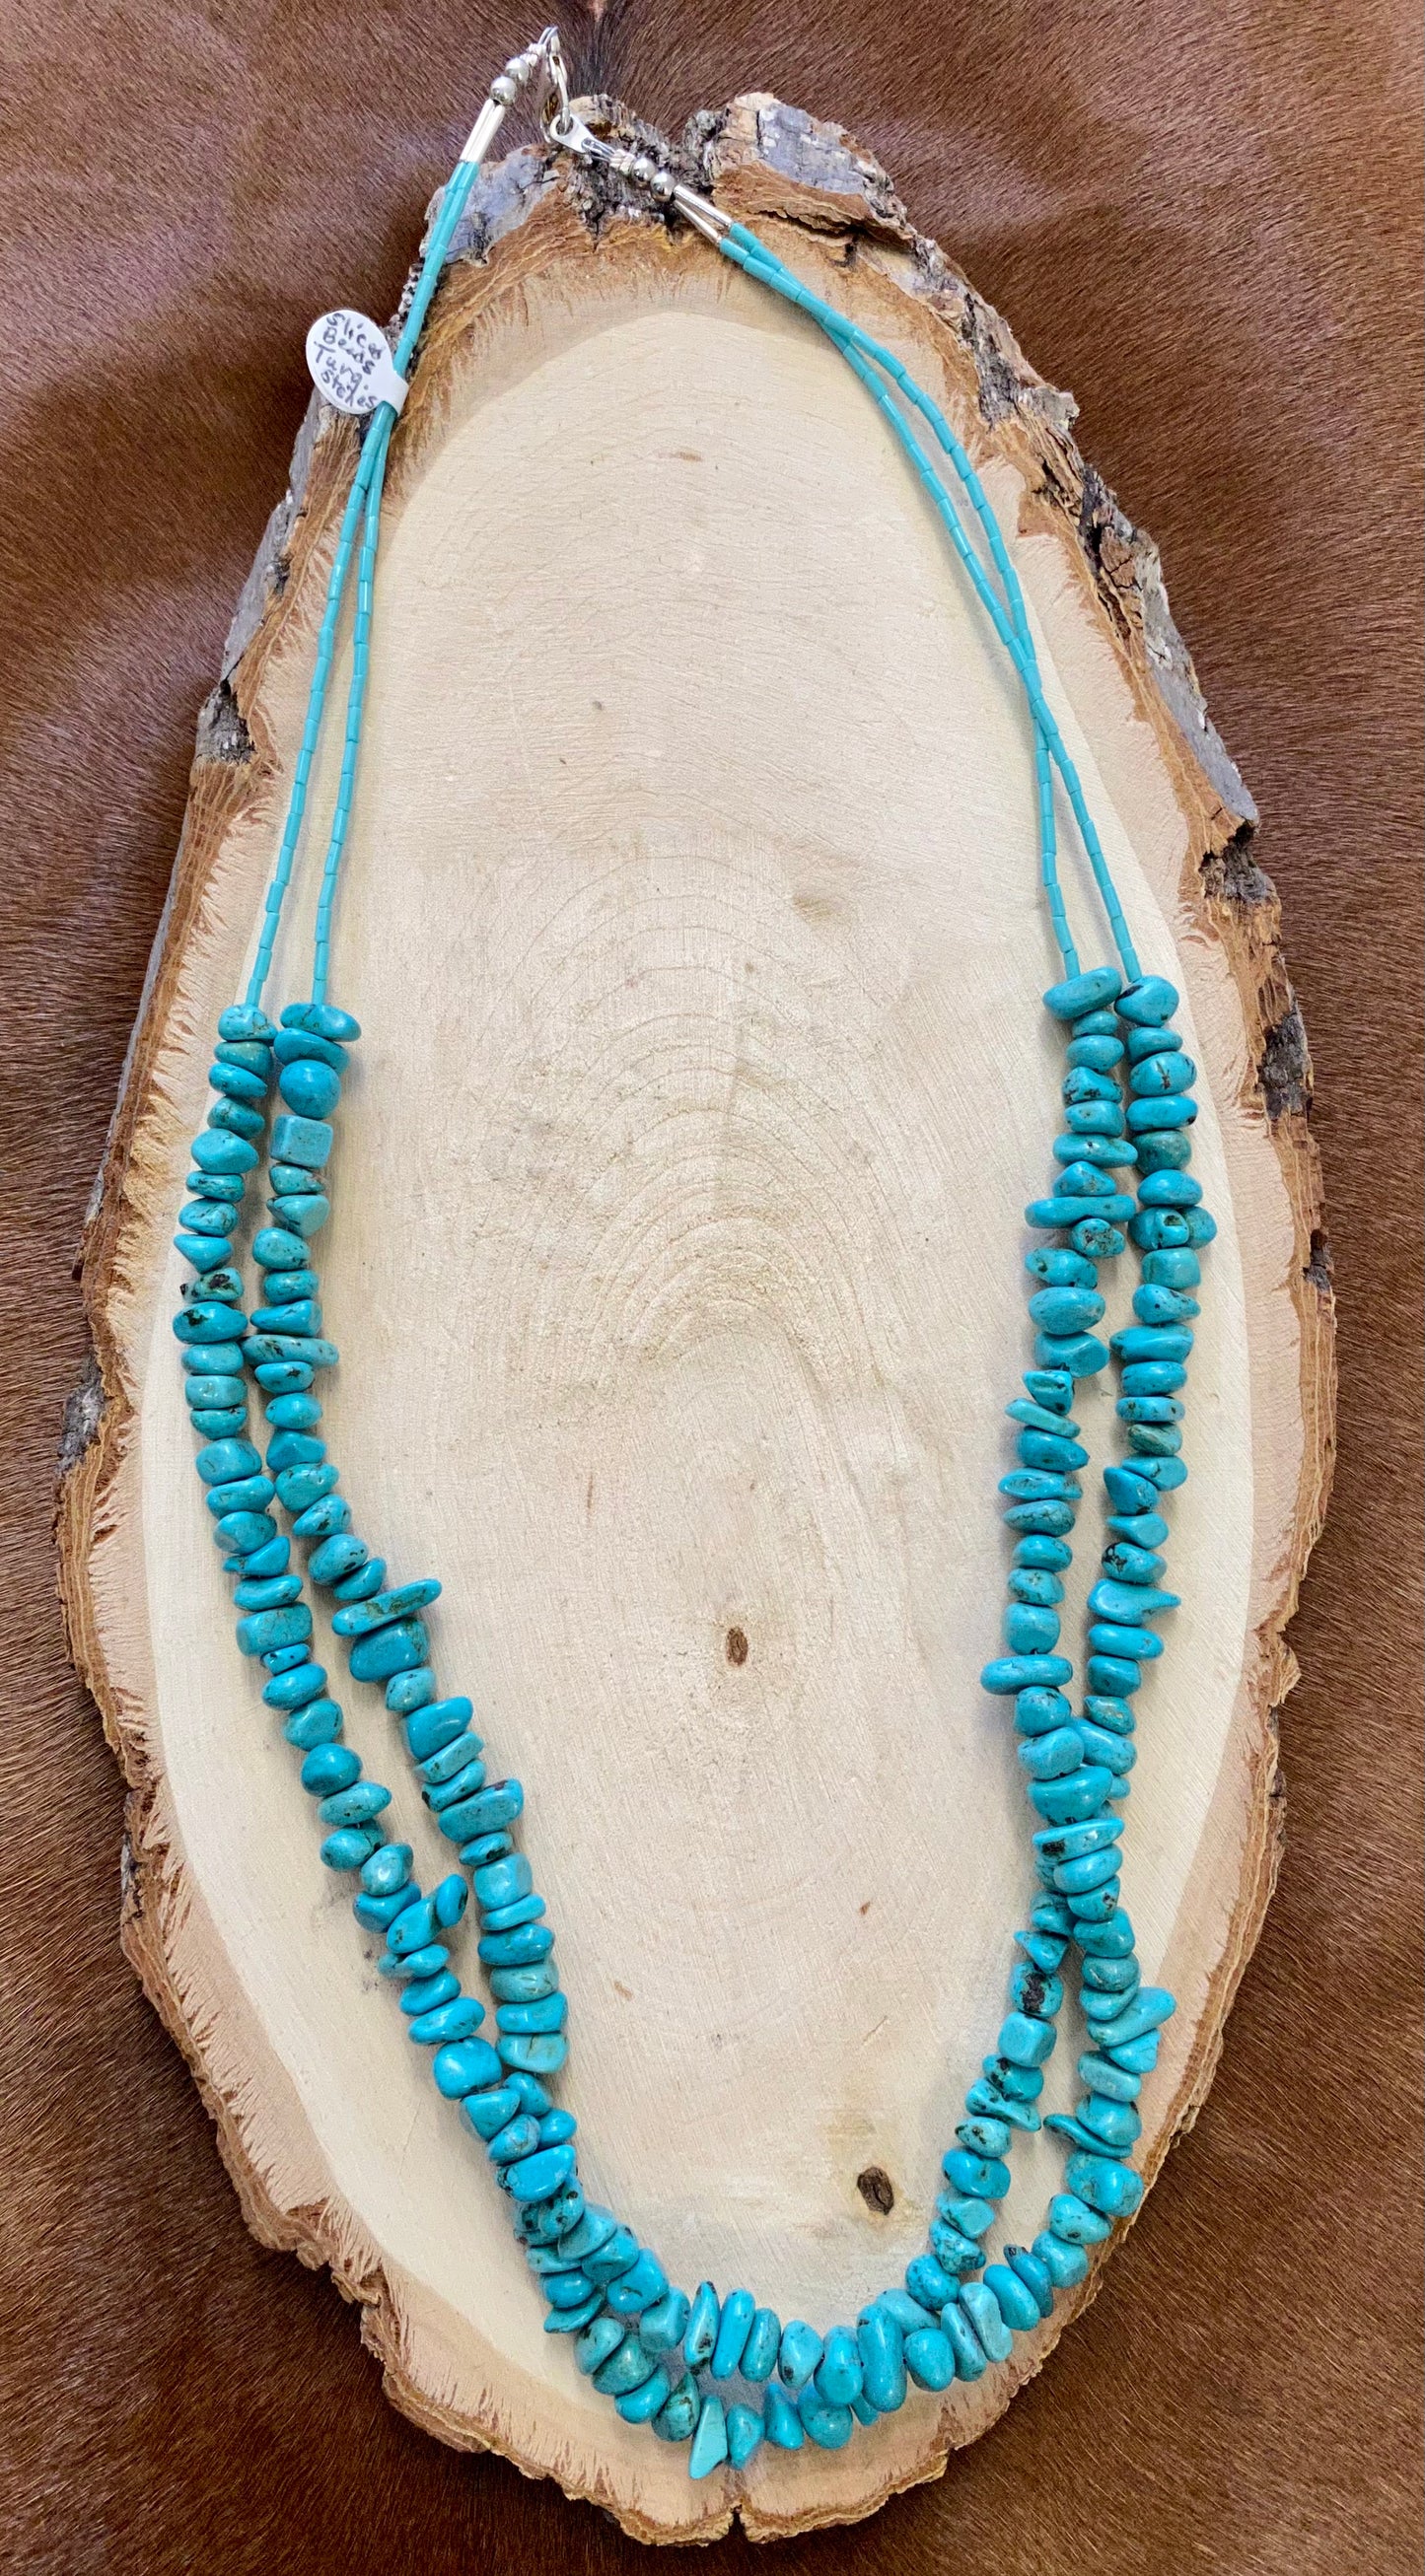 This handmade 27” inches length necklace is an absolute beauty. A stunning Native-made two-strand turquoise sliced beads necklace. Layer it or wear it alone or add a pendant to keep your look totally unique. The perfect dainty layering piece! Simple, yet striking!   Size: 27” Inches Length   Stone: Turquoise 